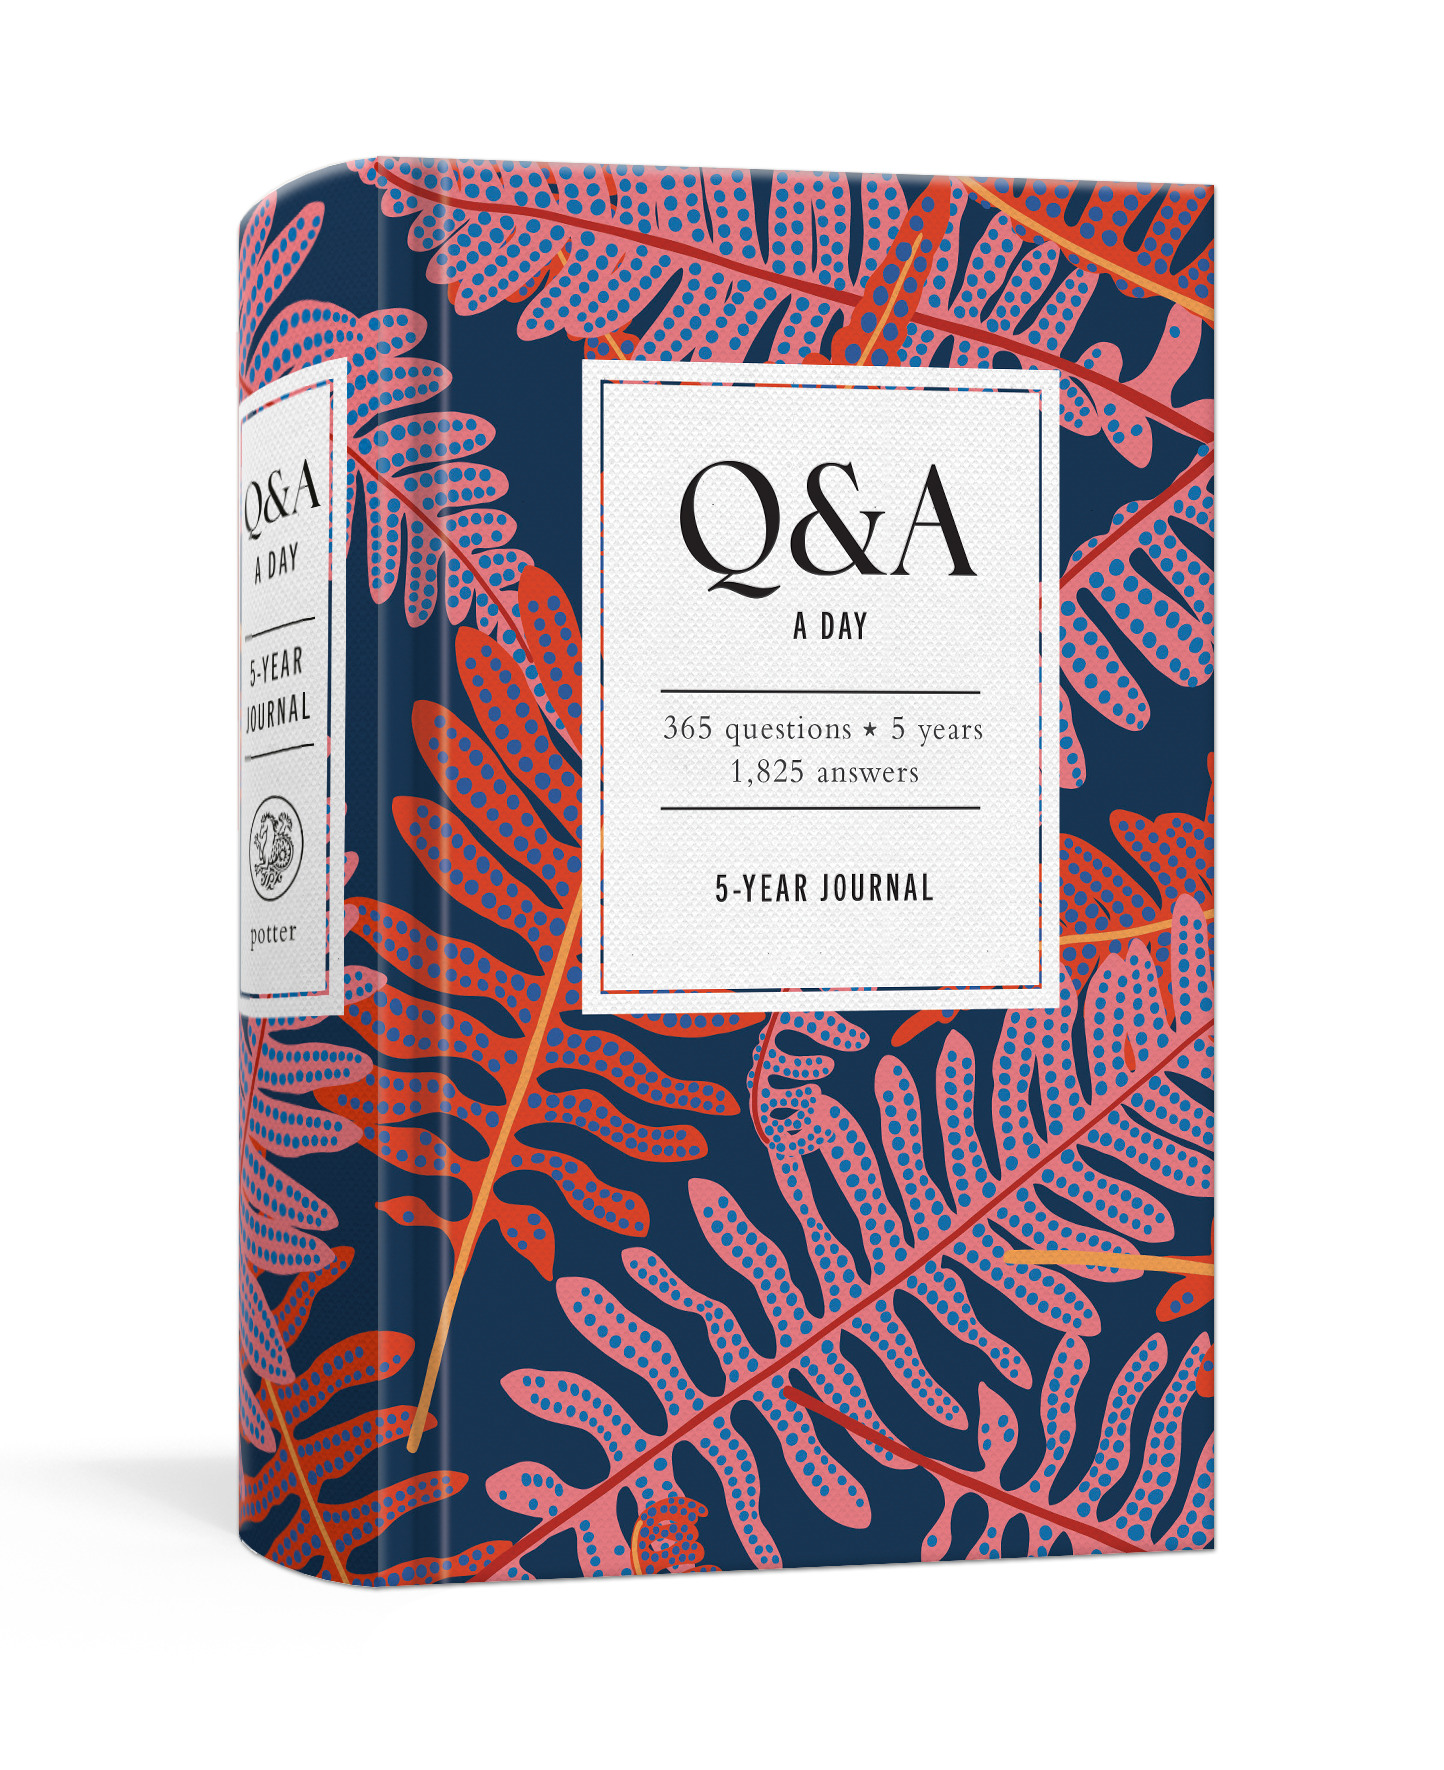 Q&A A DAY BRIGHT BOTANICALS, by POTTER GIFT